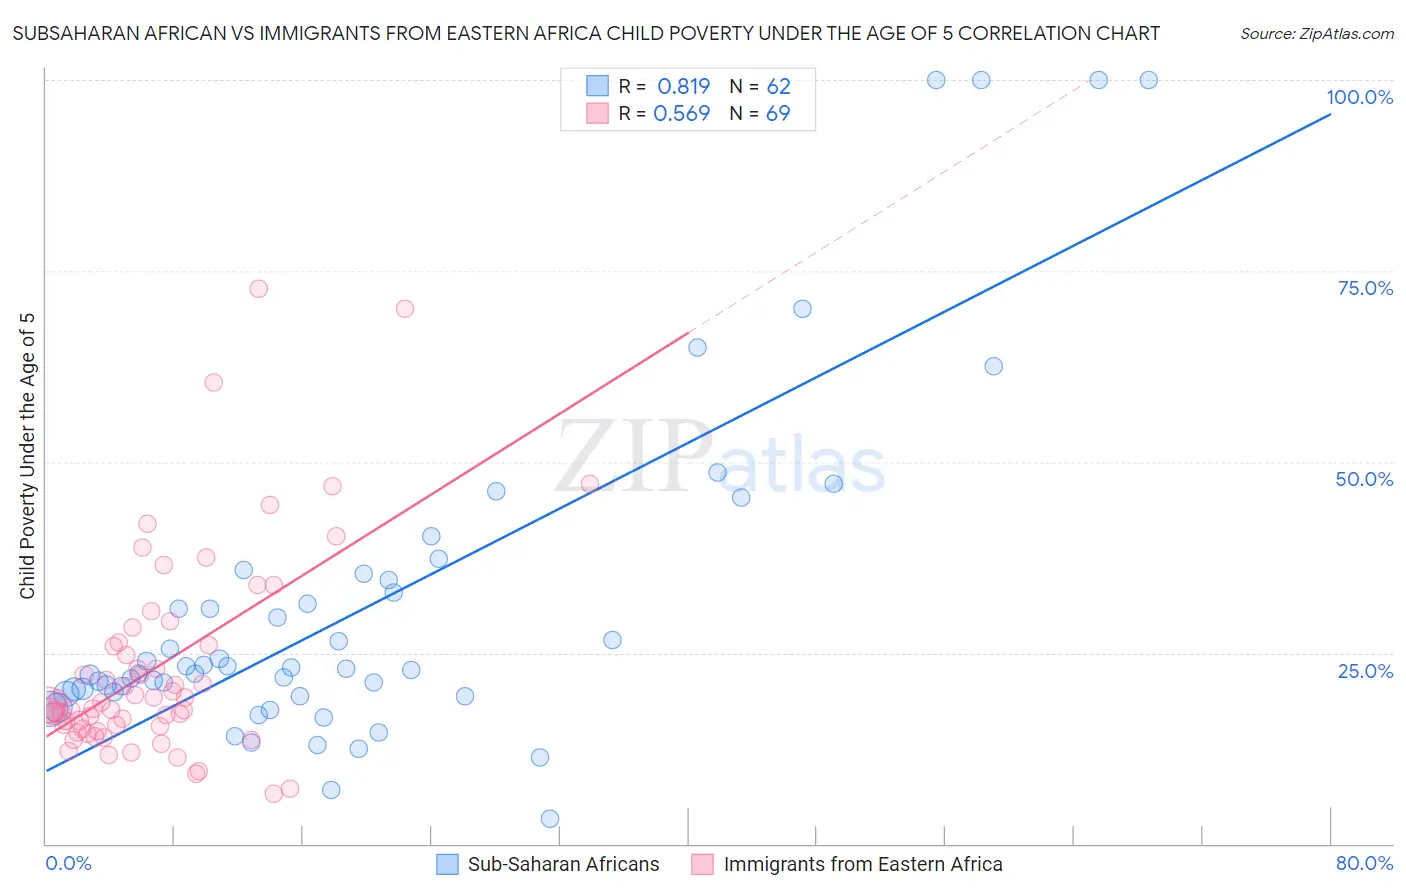 Subsaharan African vs Immigrants from Eastern Africa Child Poverty Under the Age of 5